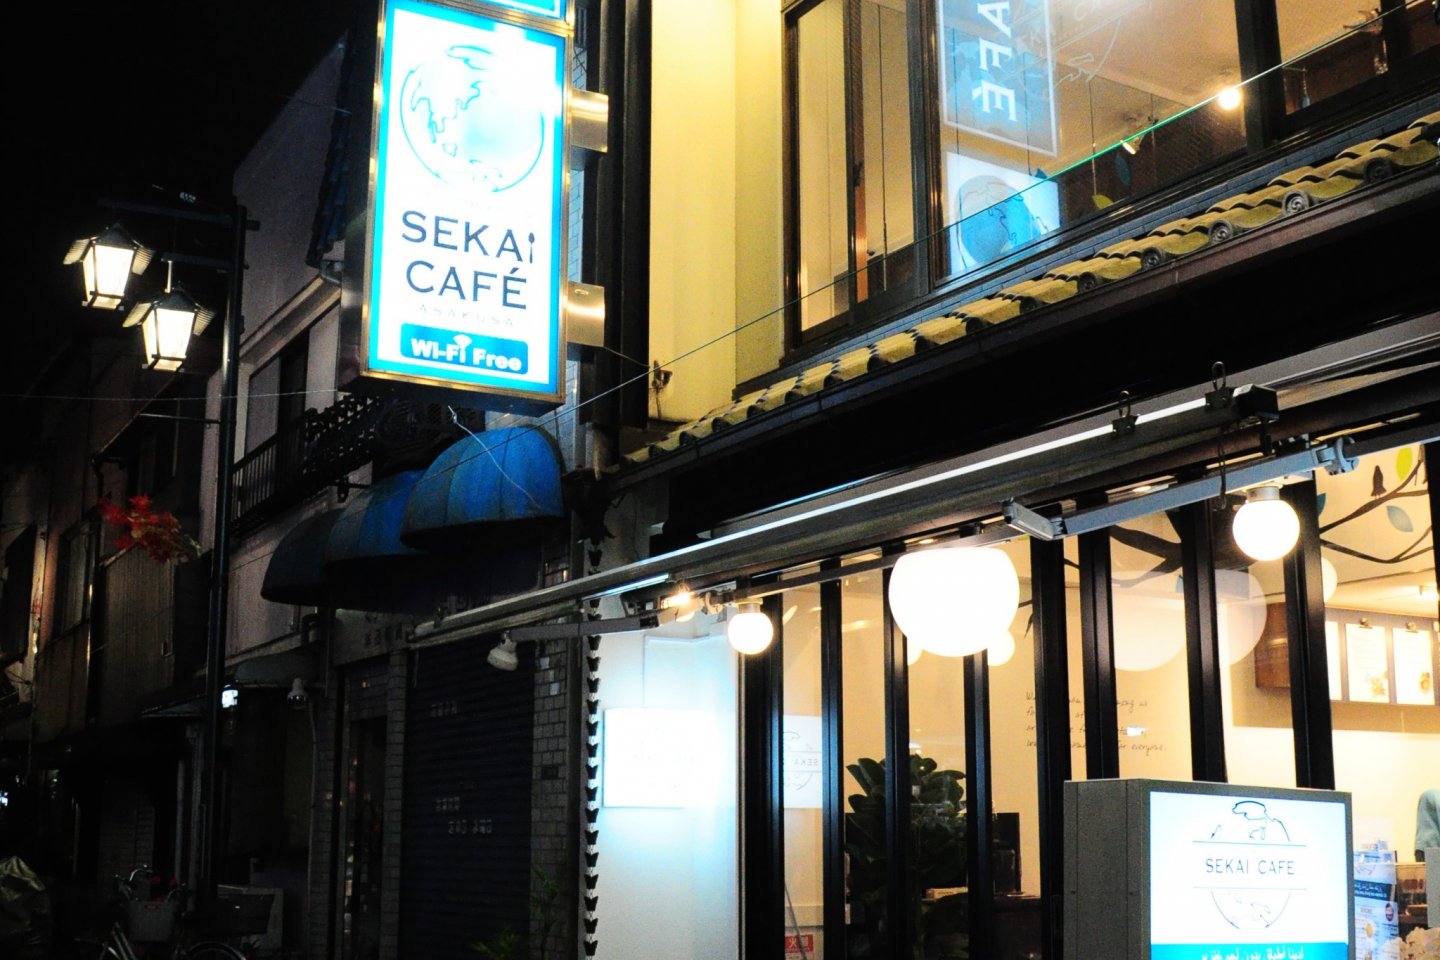 The view in front of the Sekai Cafe. Notice the blue sign board